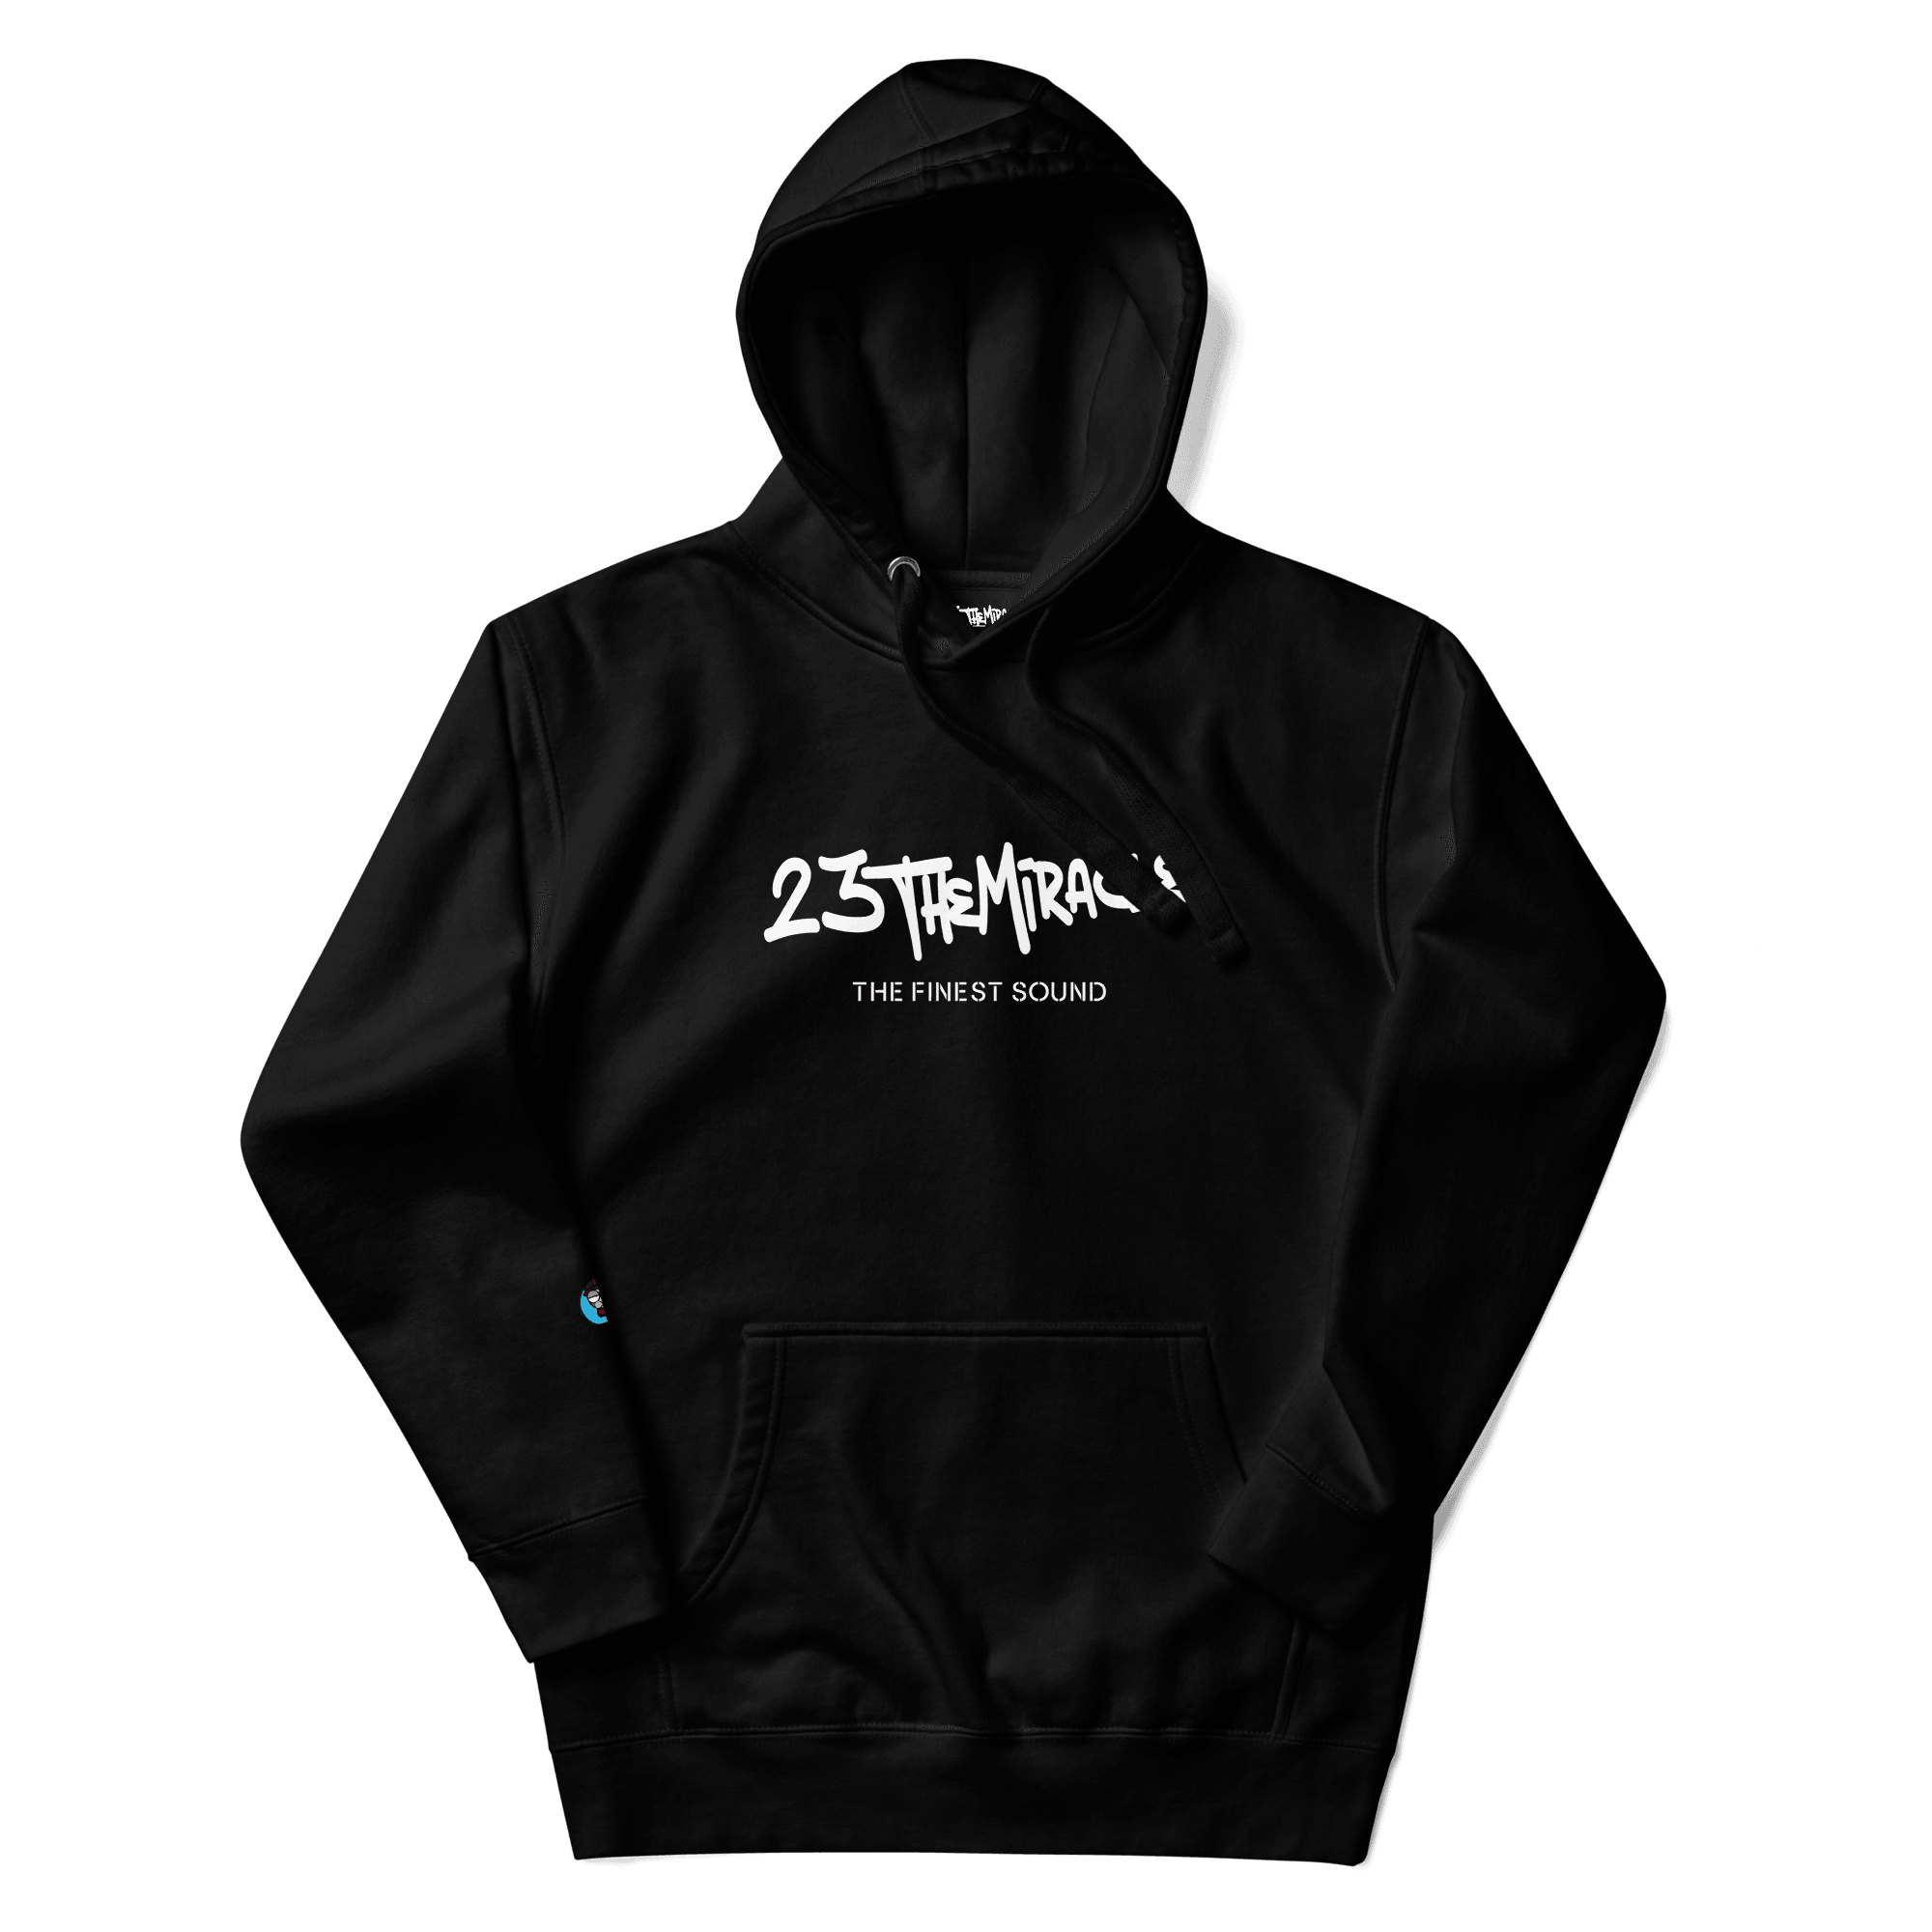 THE FINEST SOUND HOODIE - 23 TheMiracle